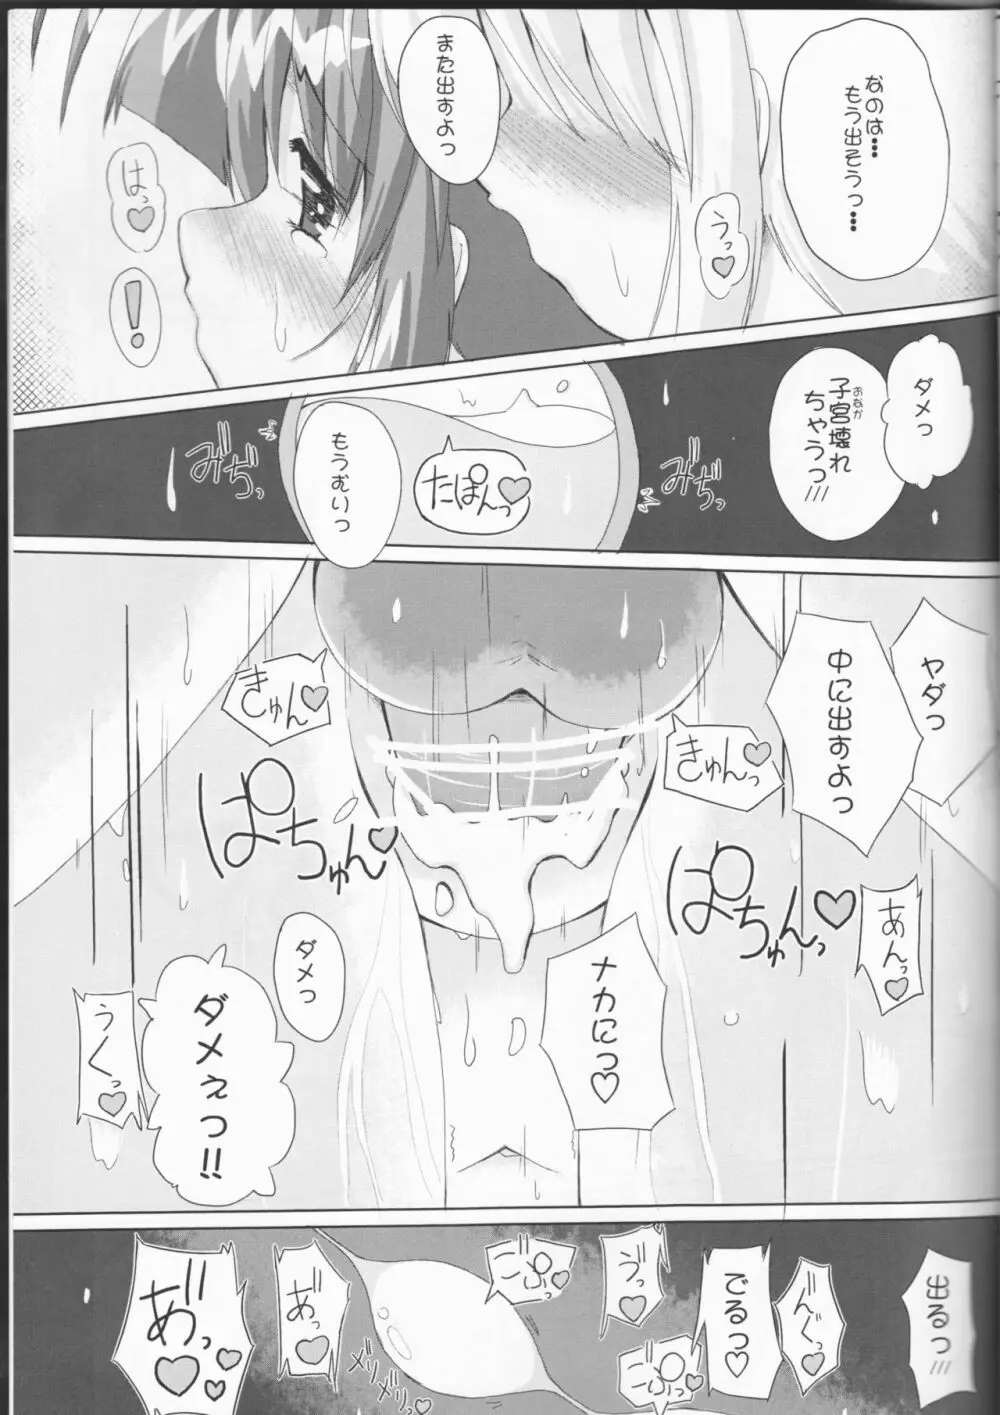 Pure Heart 11th Episode ～Dense Time～ Page.12